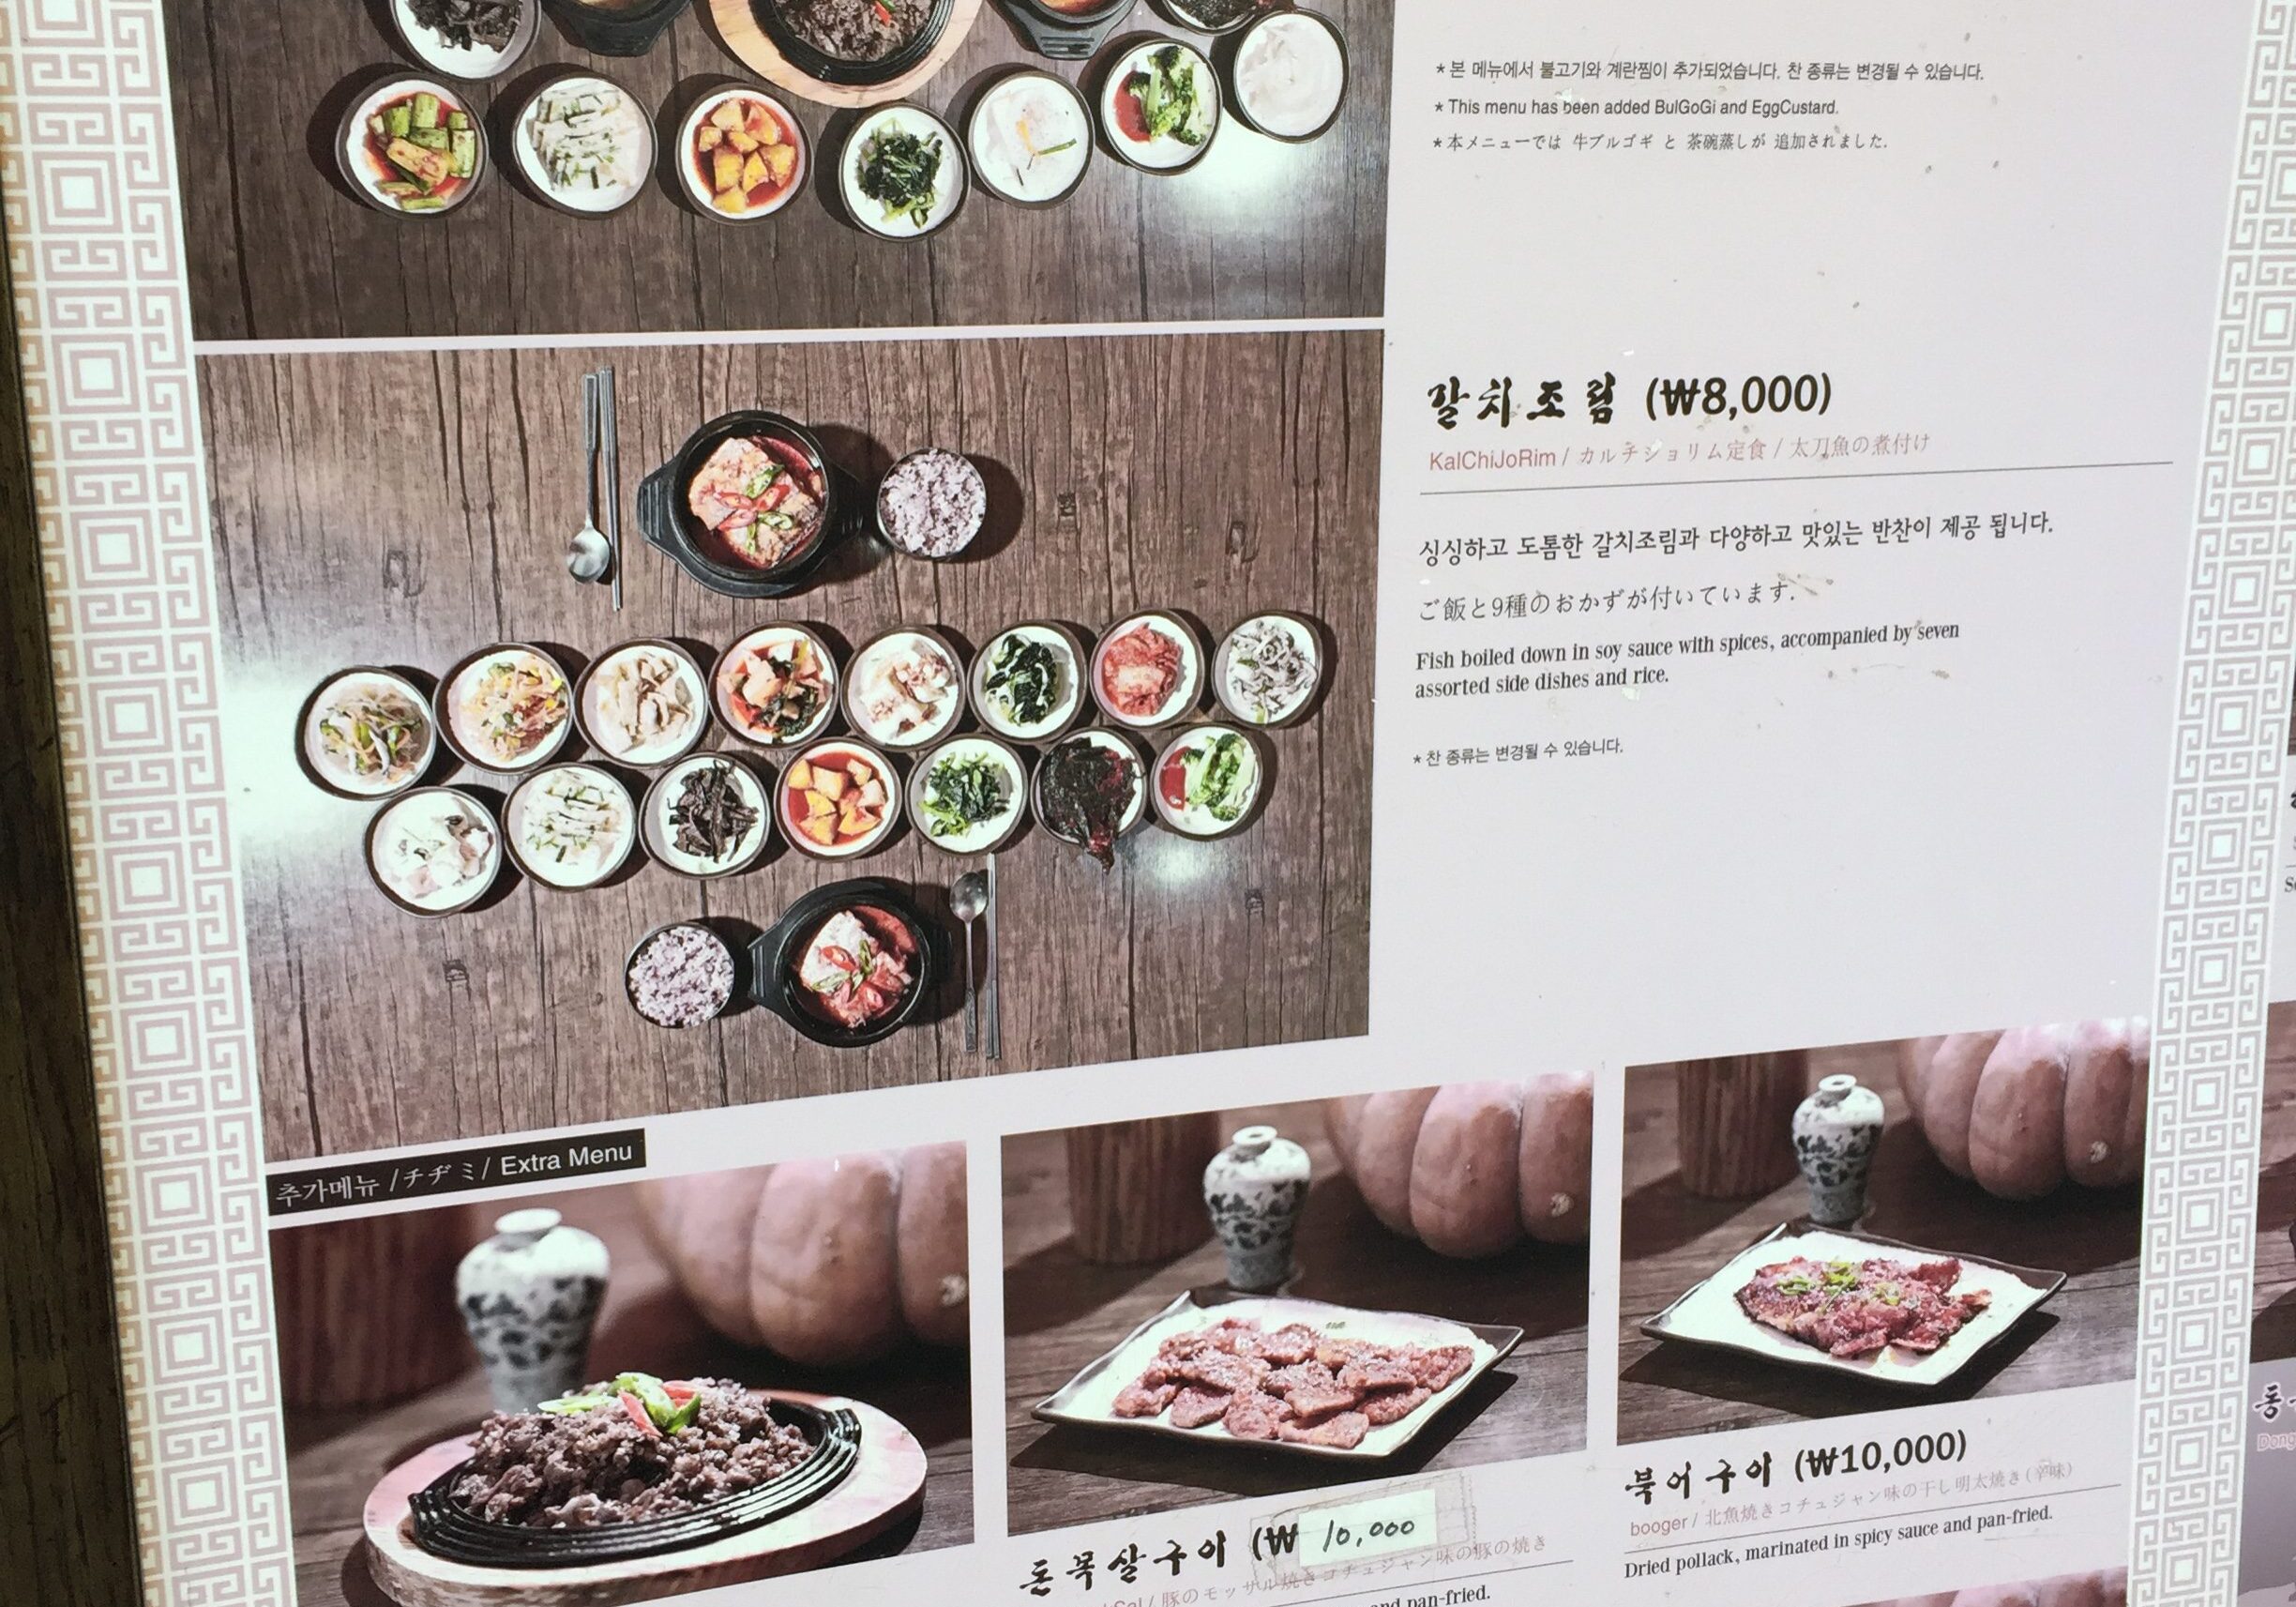 Look! Traditional Korean Meal for only 7,000 won!